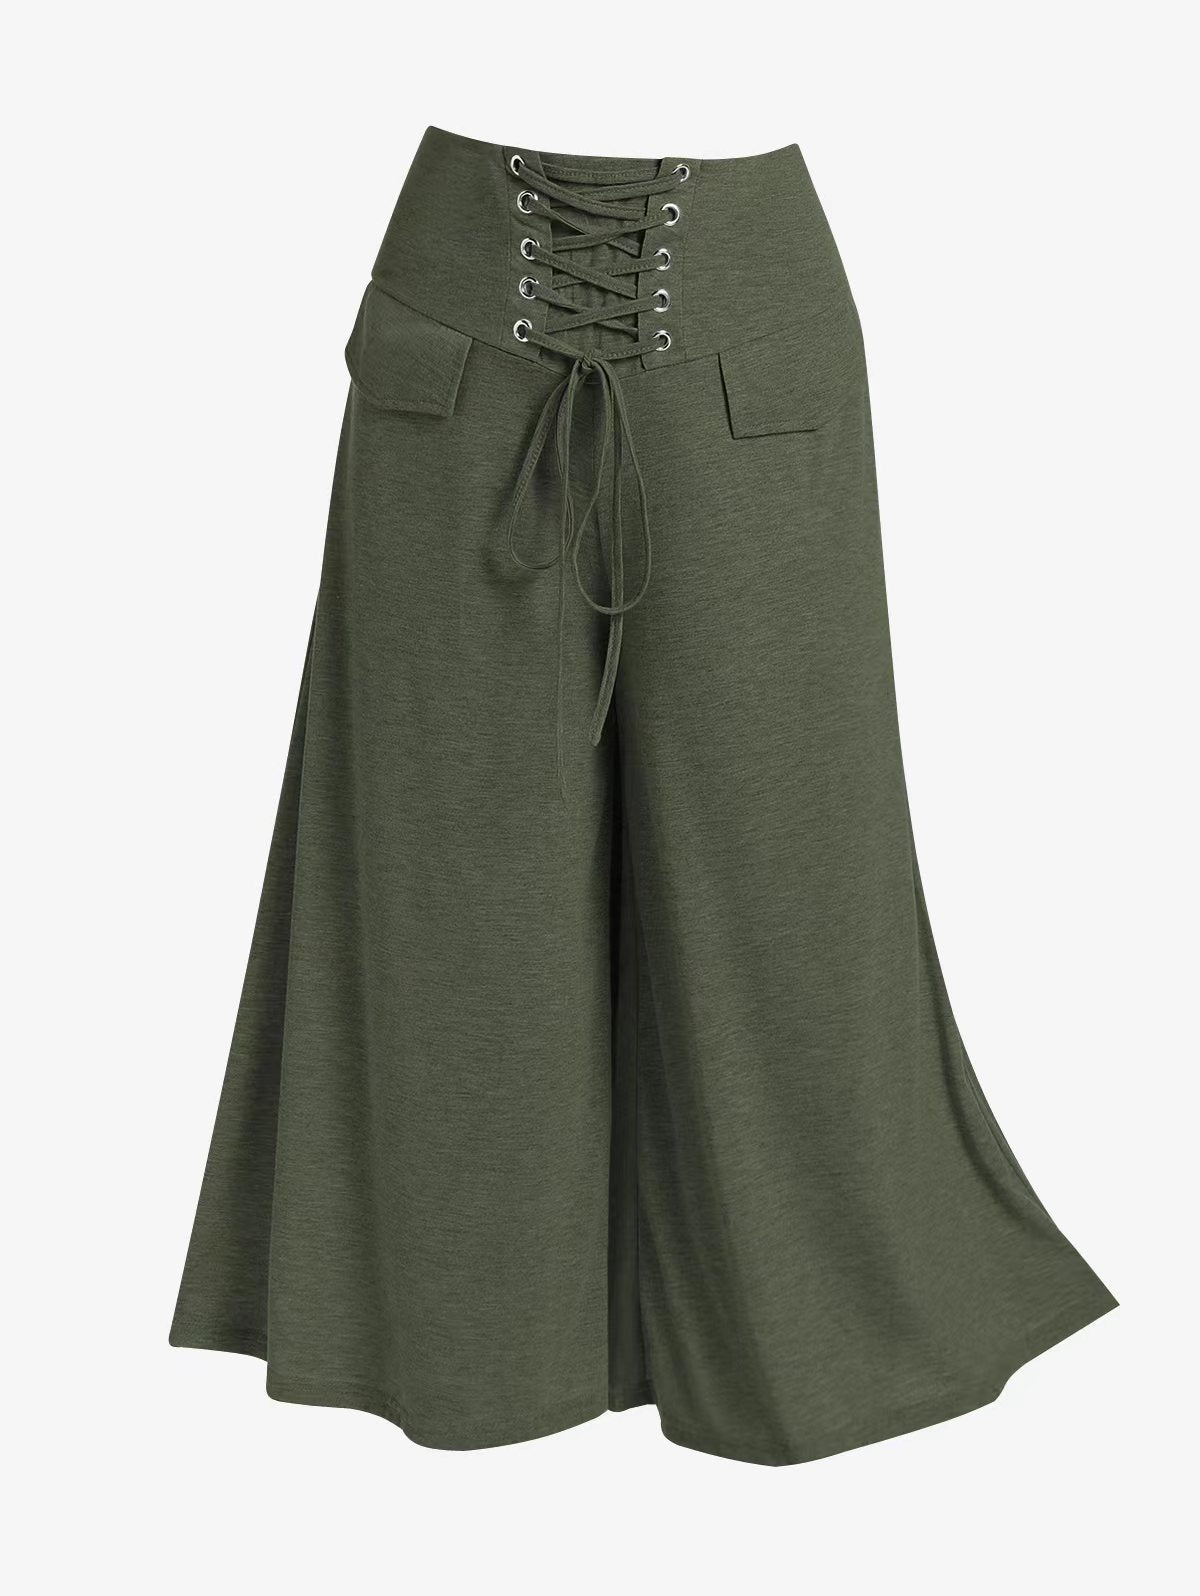 Pants  | Women's Clothing High Waist With Straps Plus Size Loose Pants | Army Green |  2XL| thecurvestory.myshopify.com